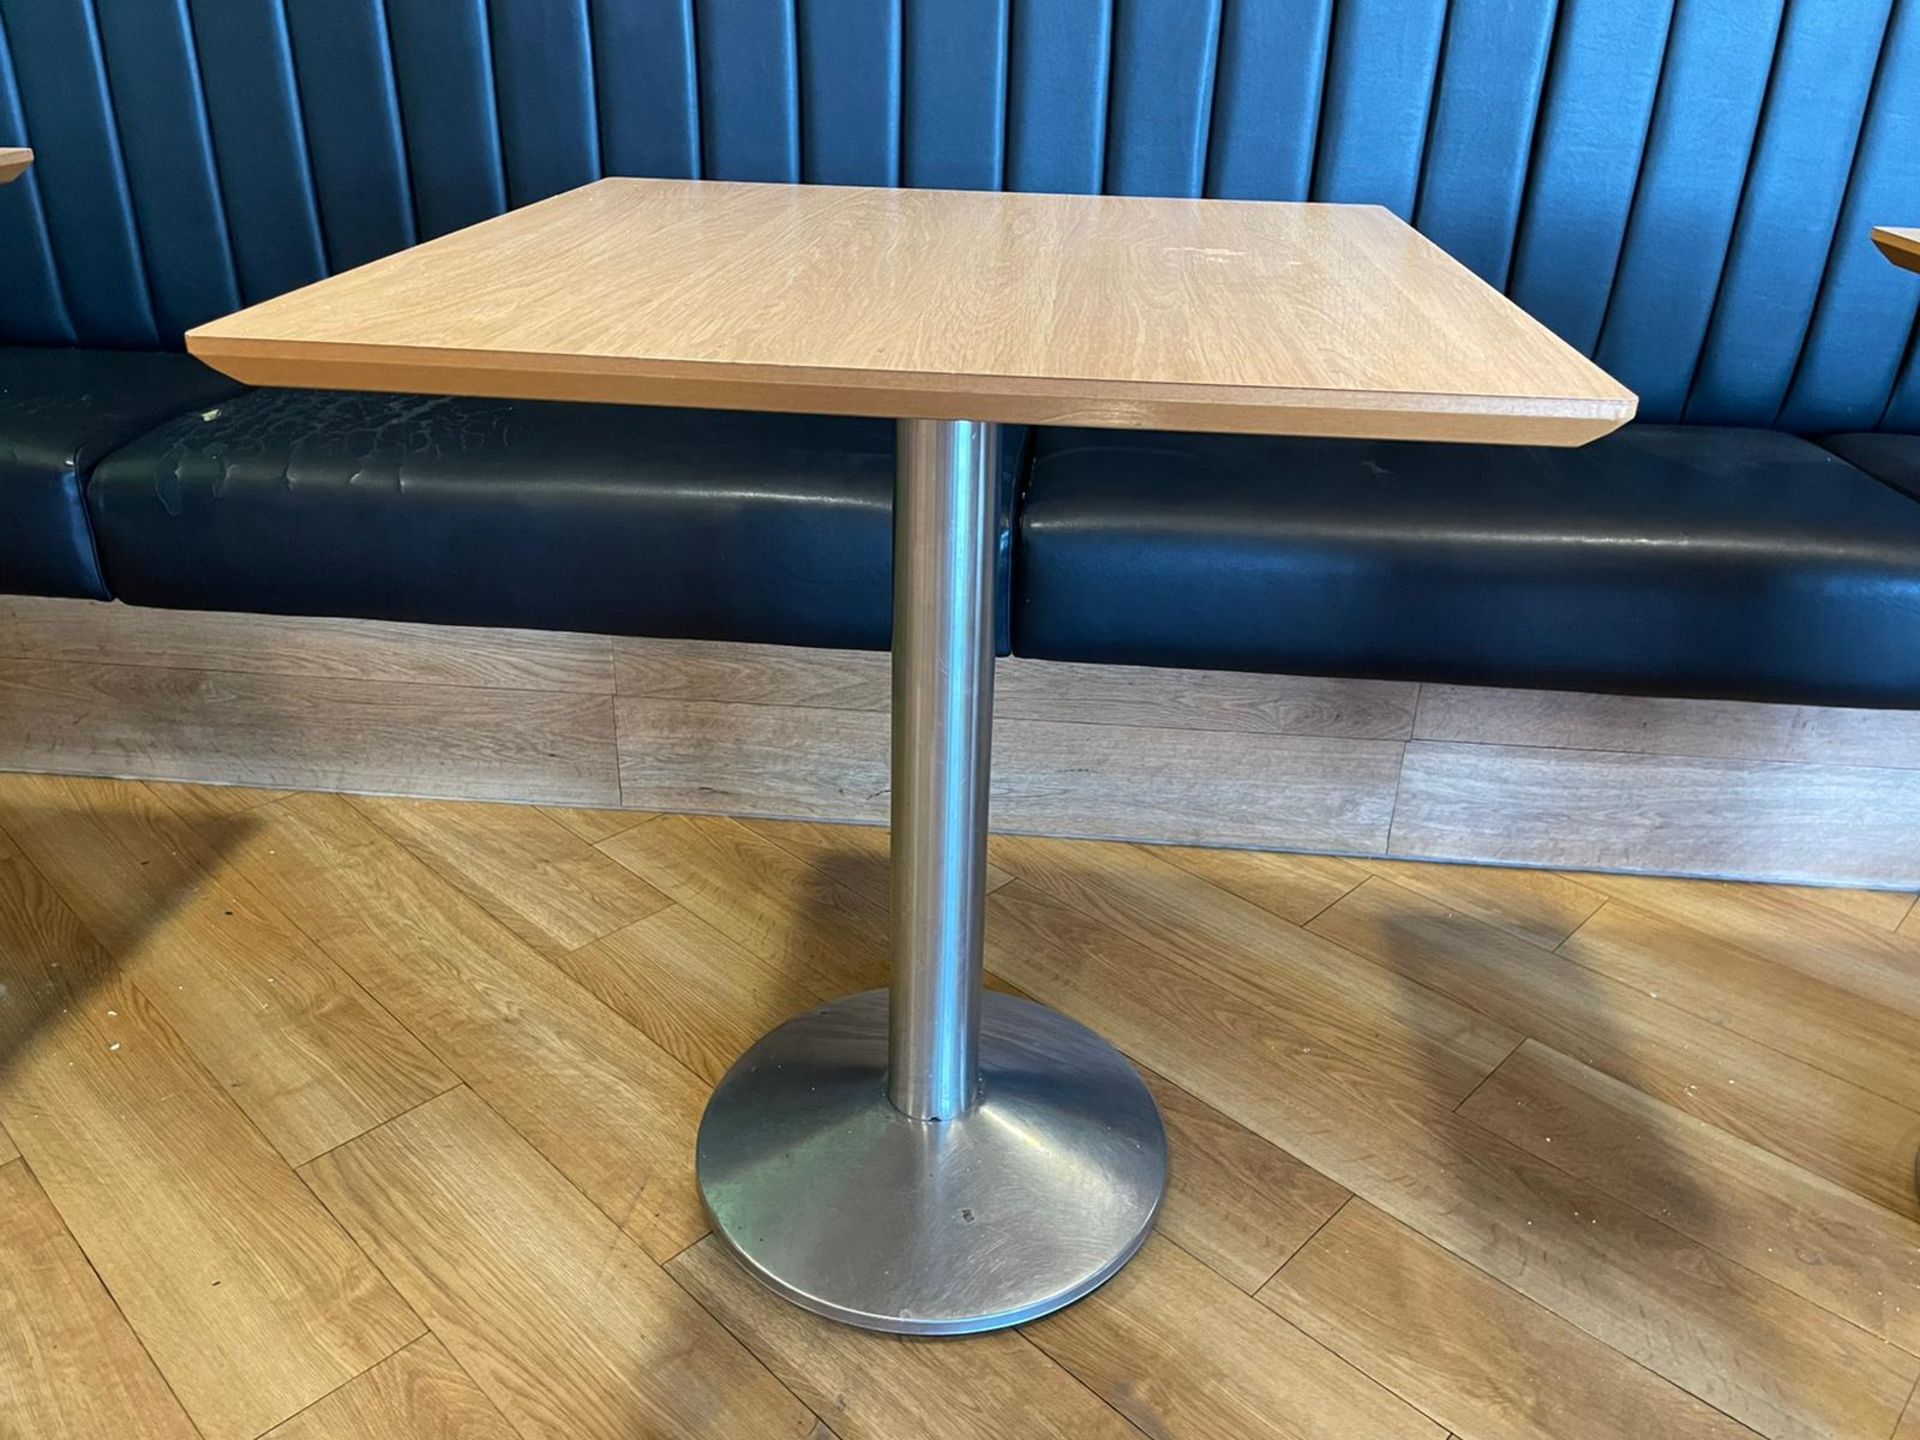 Bench Seating, 6 Tables And 6 Chairs - Image 11 of 11